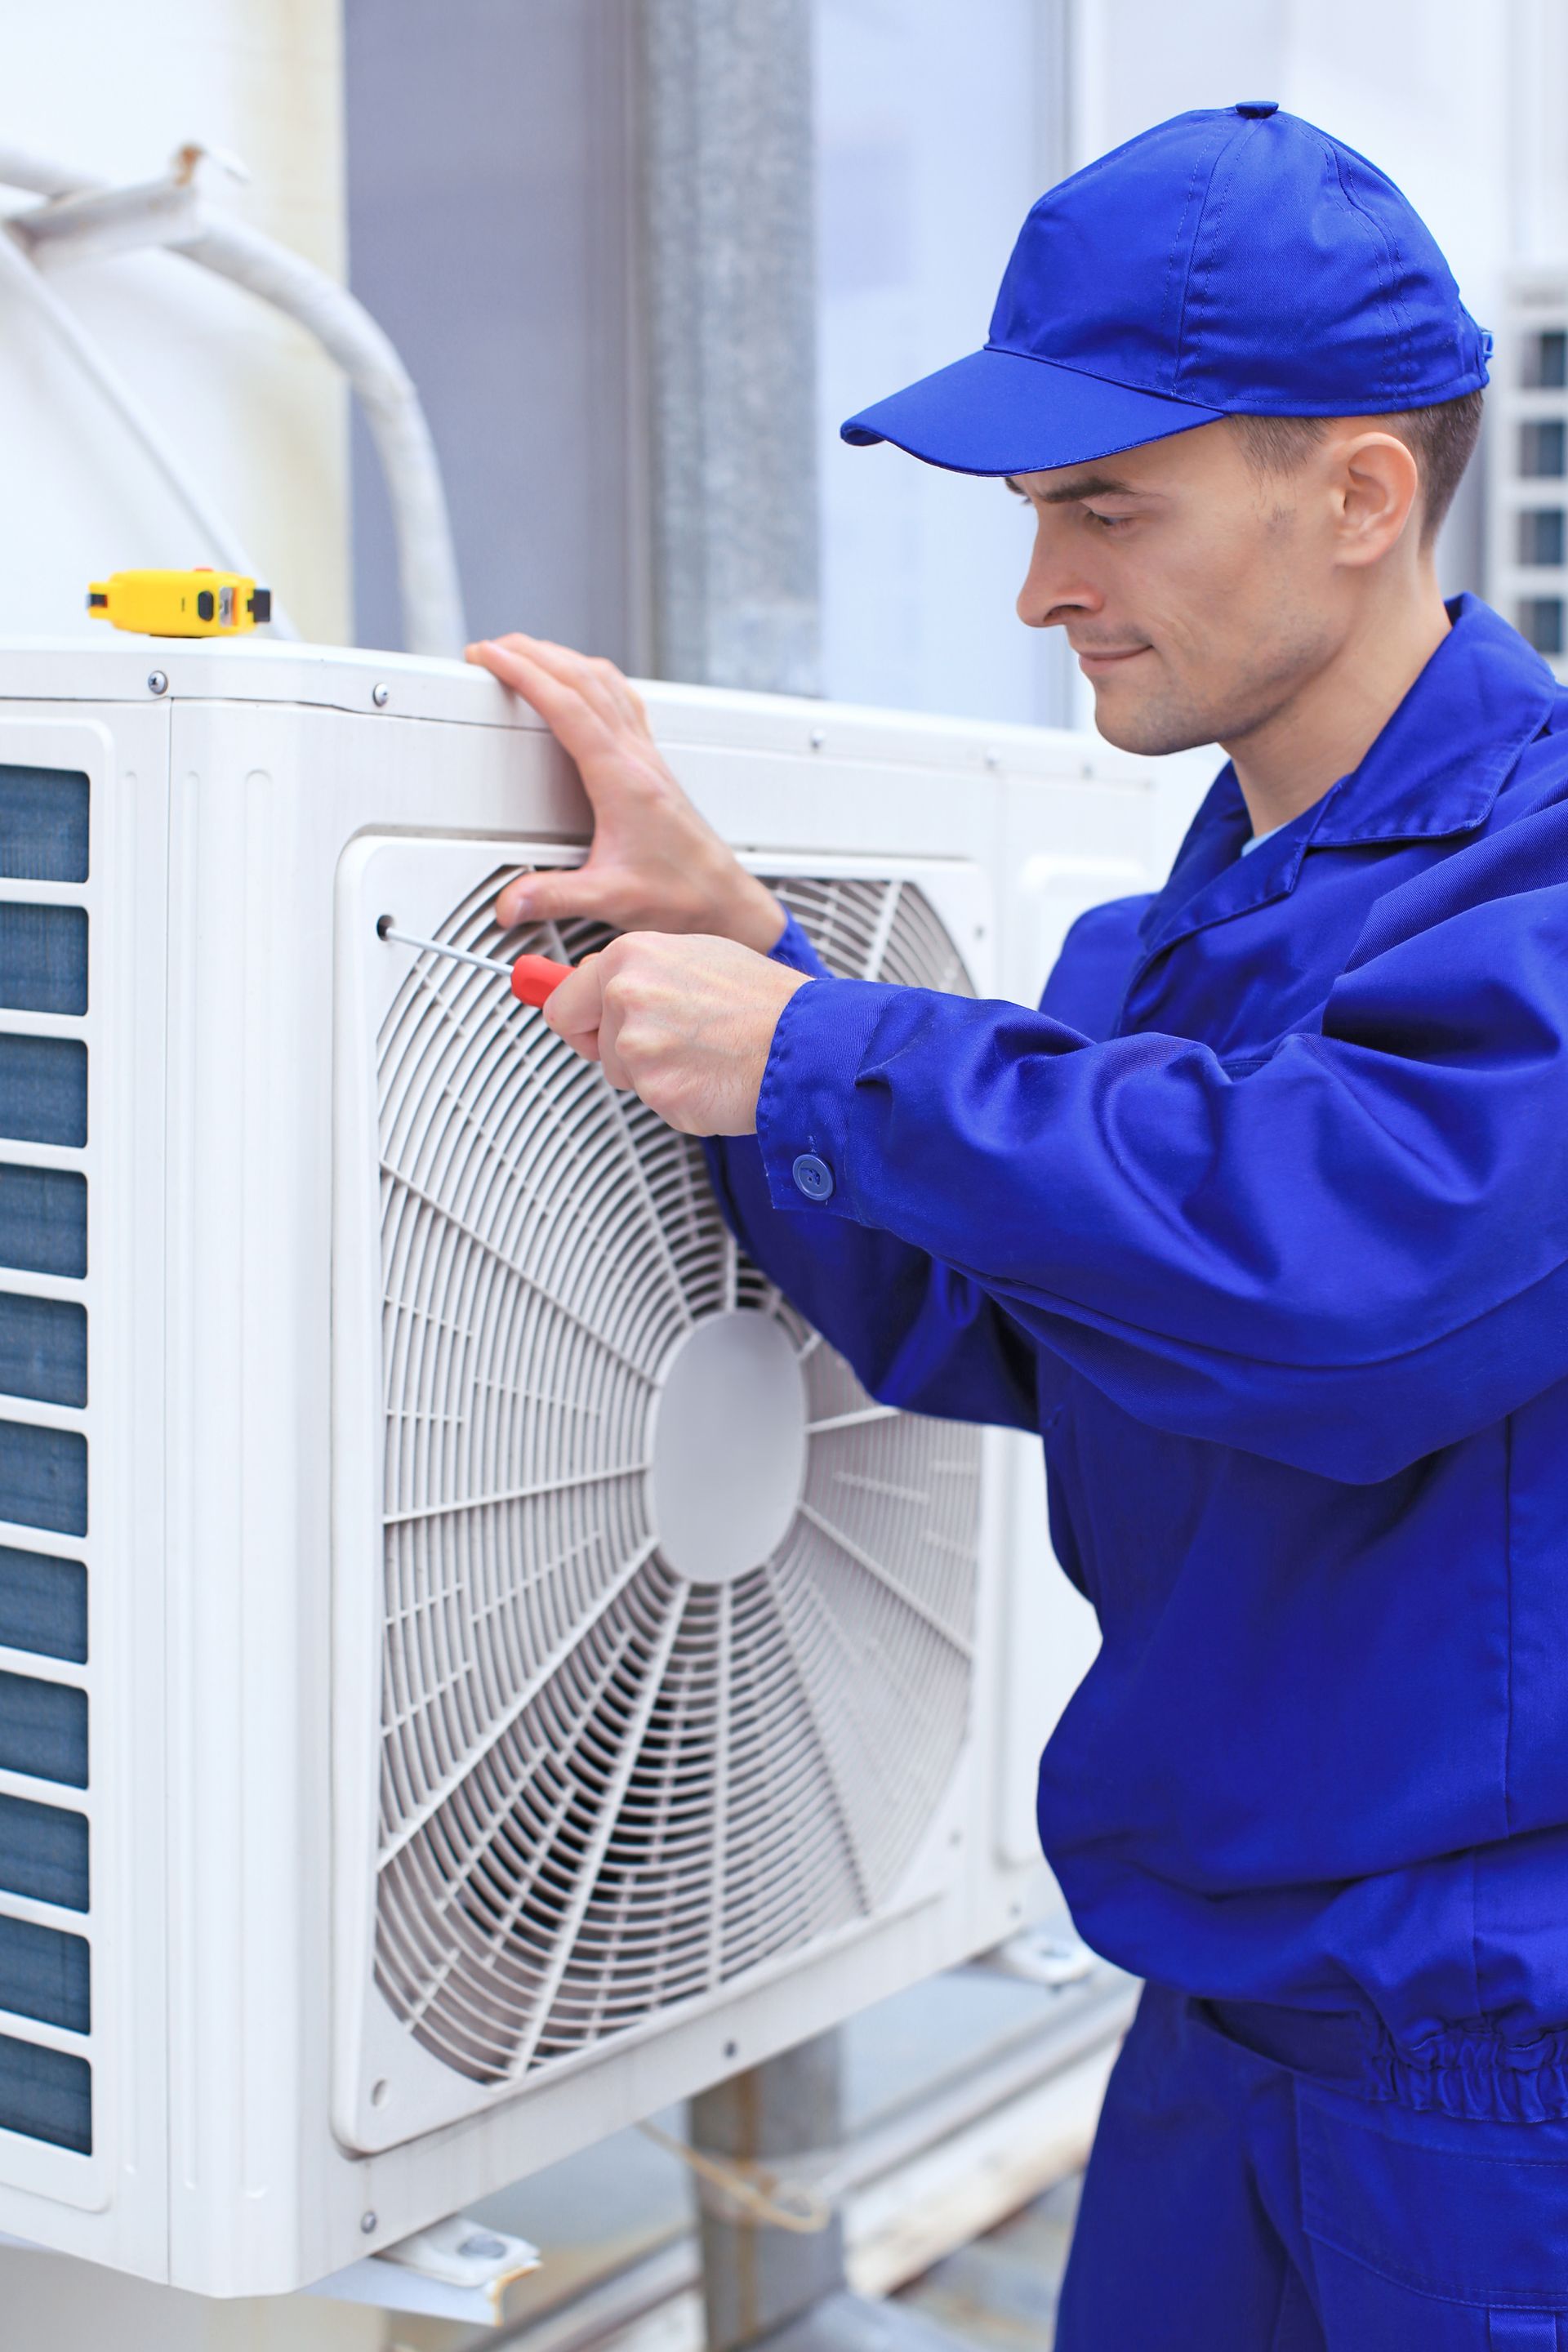 A man in a blue uniform is fixing an air conditioner with a screwdriver.